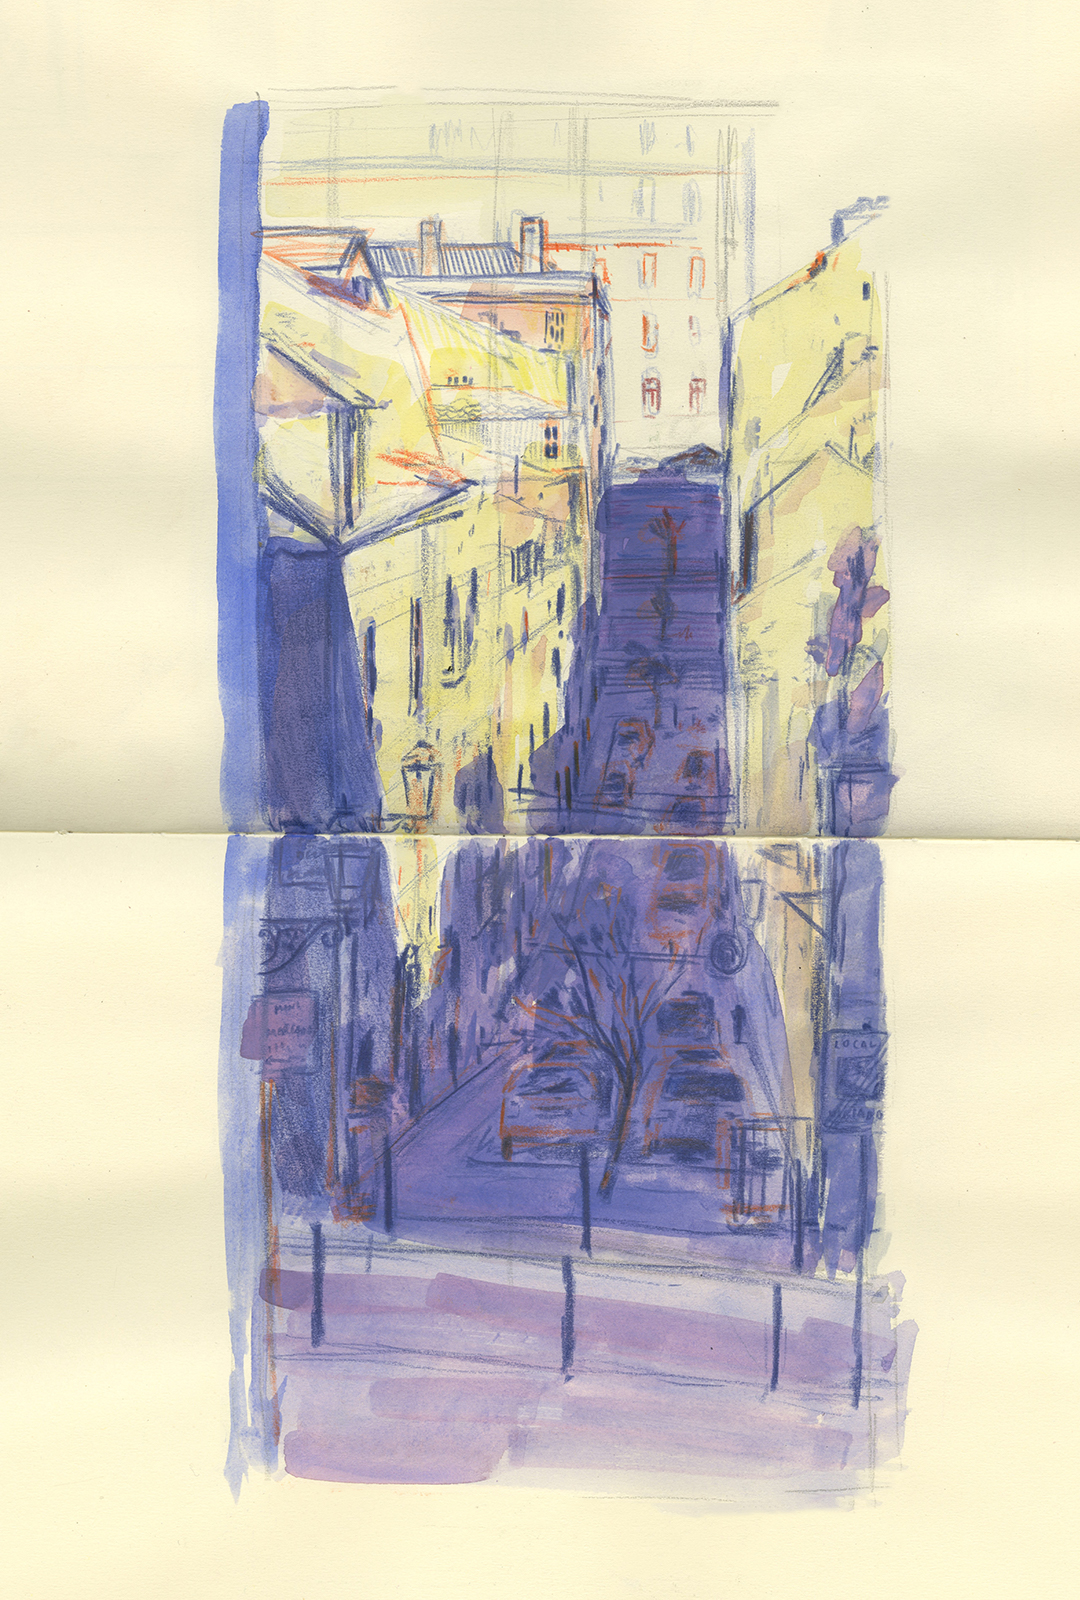 Lisbon Observational Drawing Drawing on location in gouache and pencils.